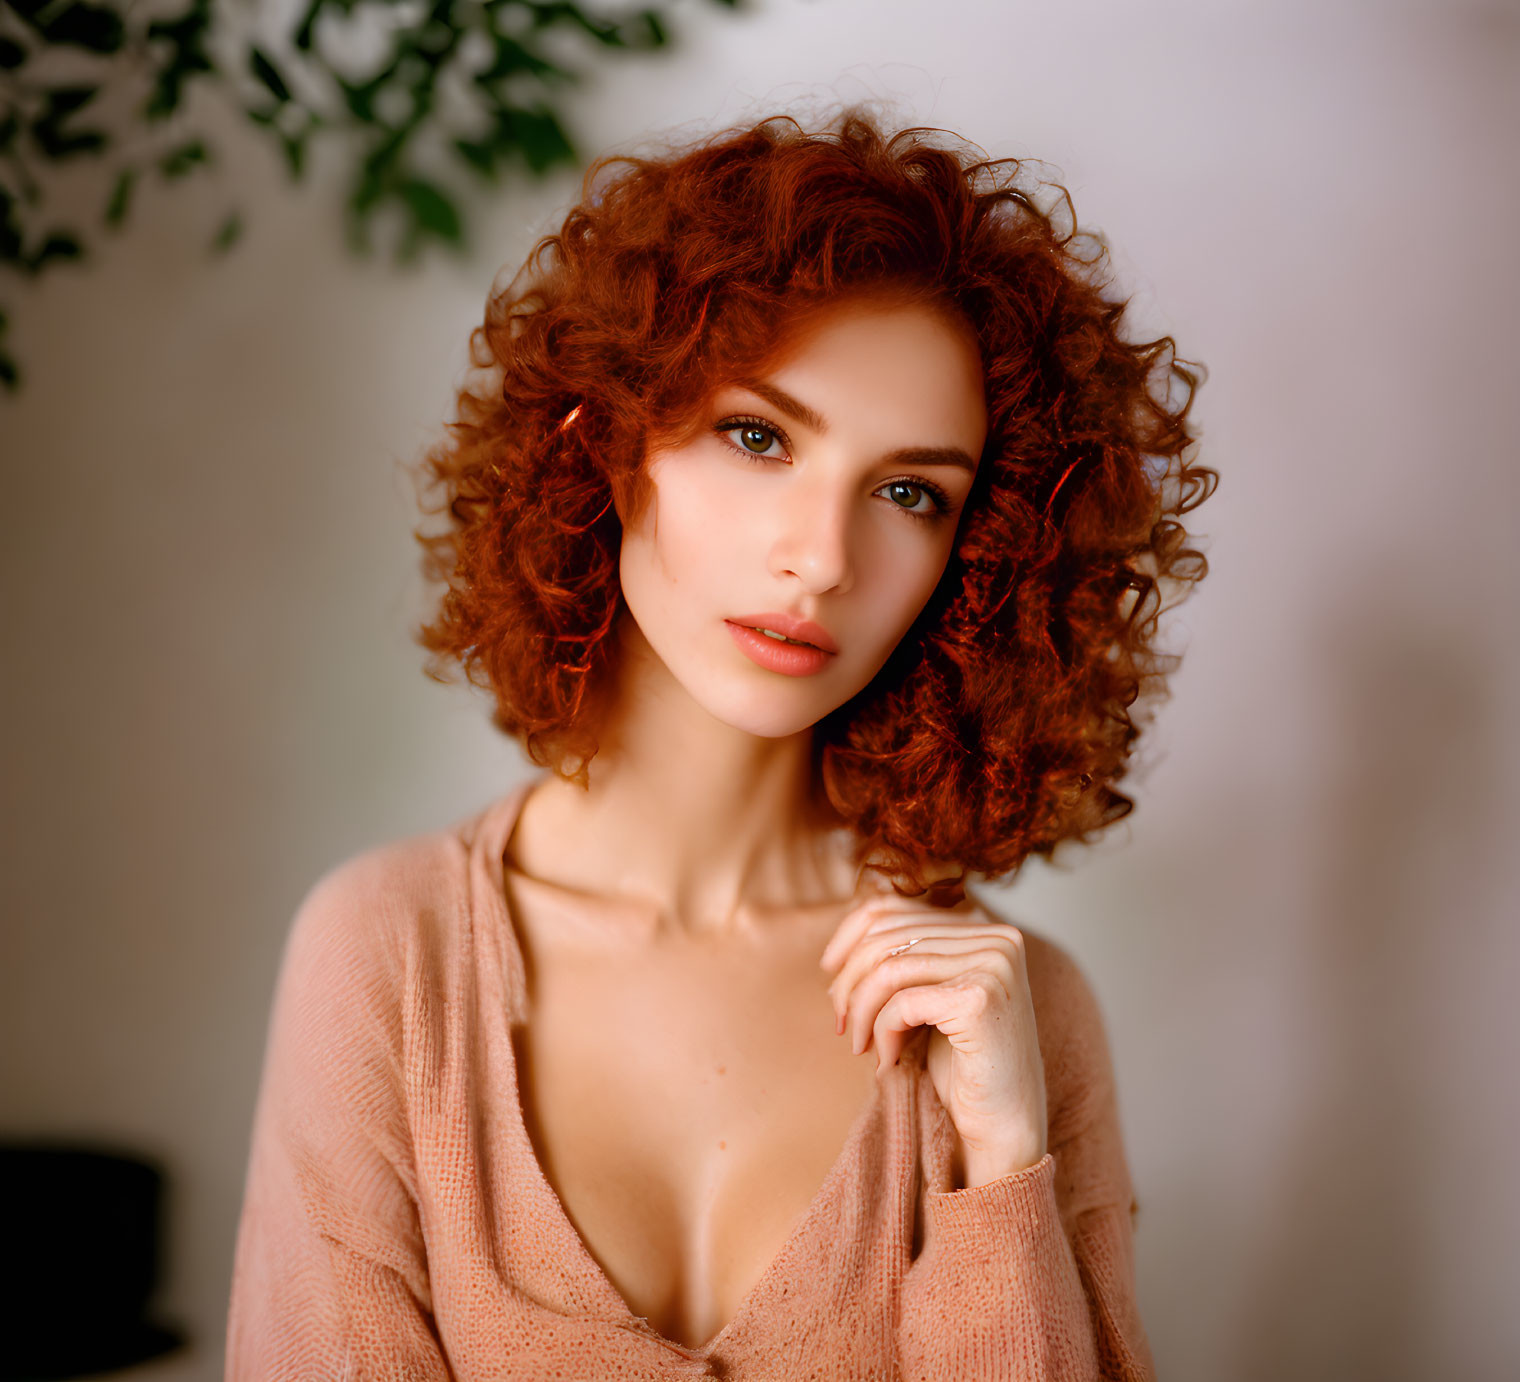 Portrait of Woman with Curly Red Hair and Blue Eyes in Light Pink Blouse